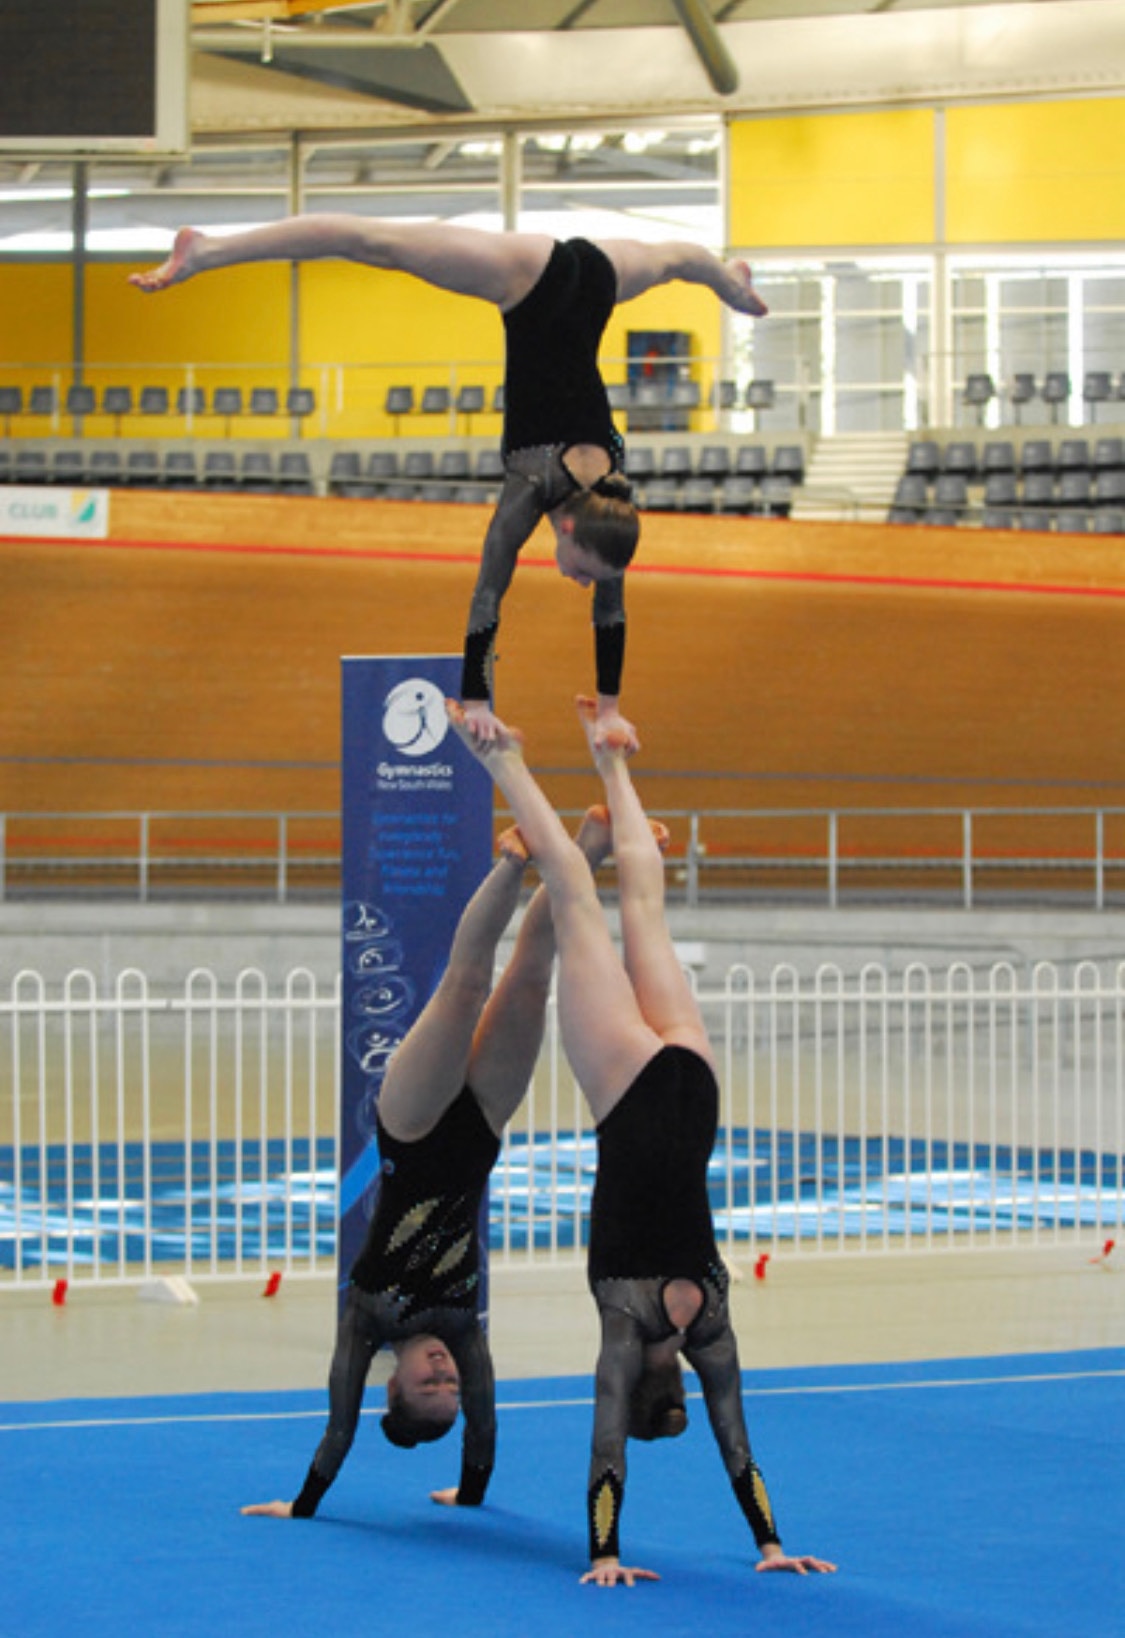 A photo of three gymnasts performing an acrobatic routine